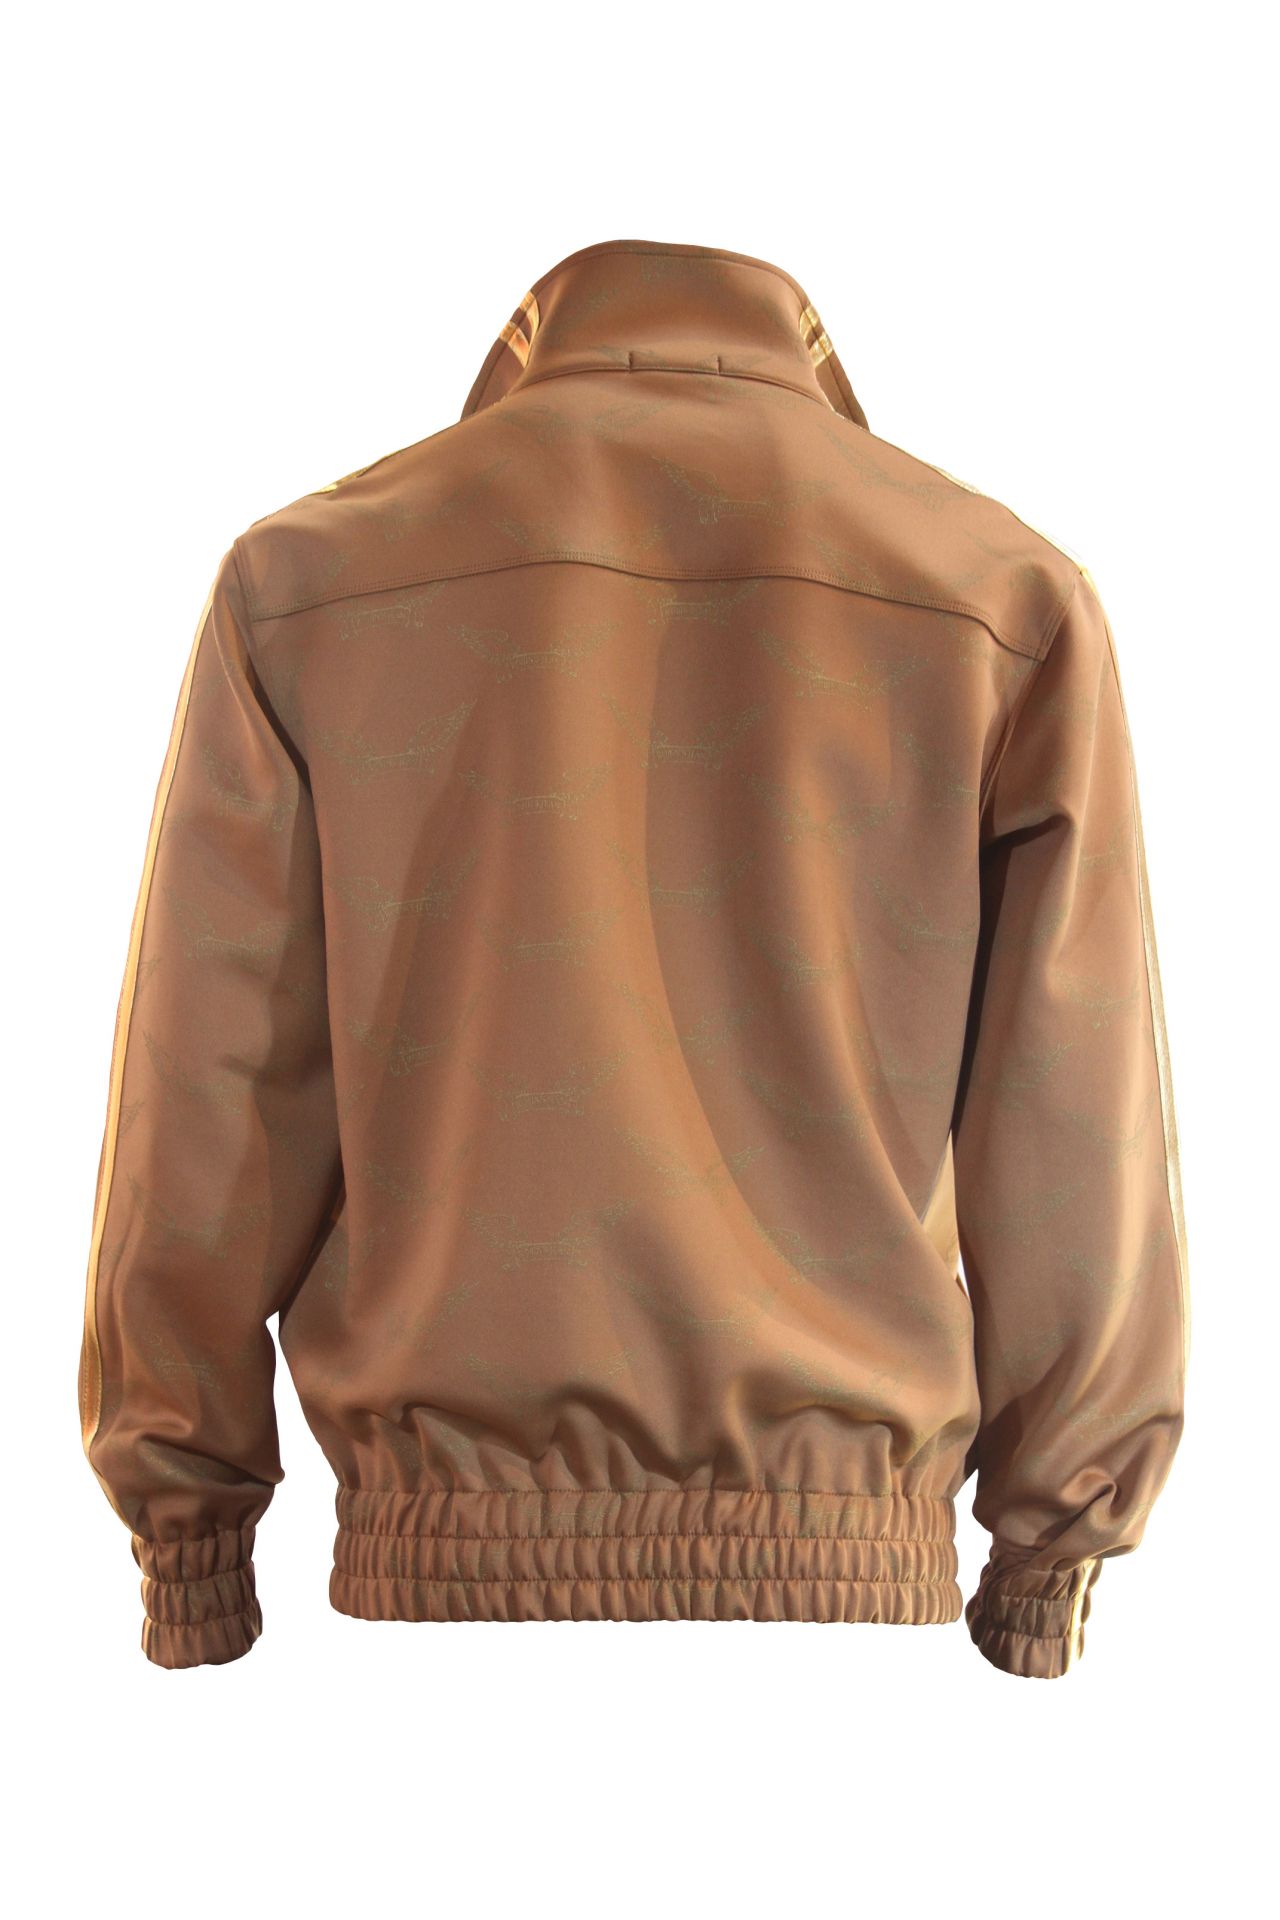 ROBIN'S MONOGRAM TRACK JACKET IN KHAKI AND GOLD